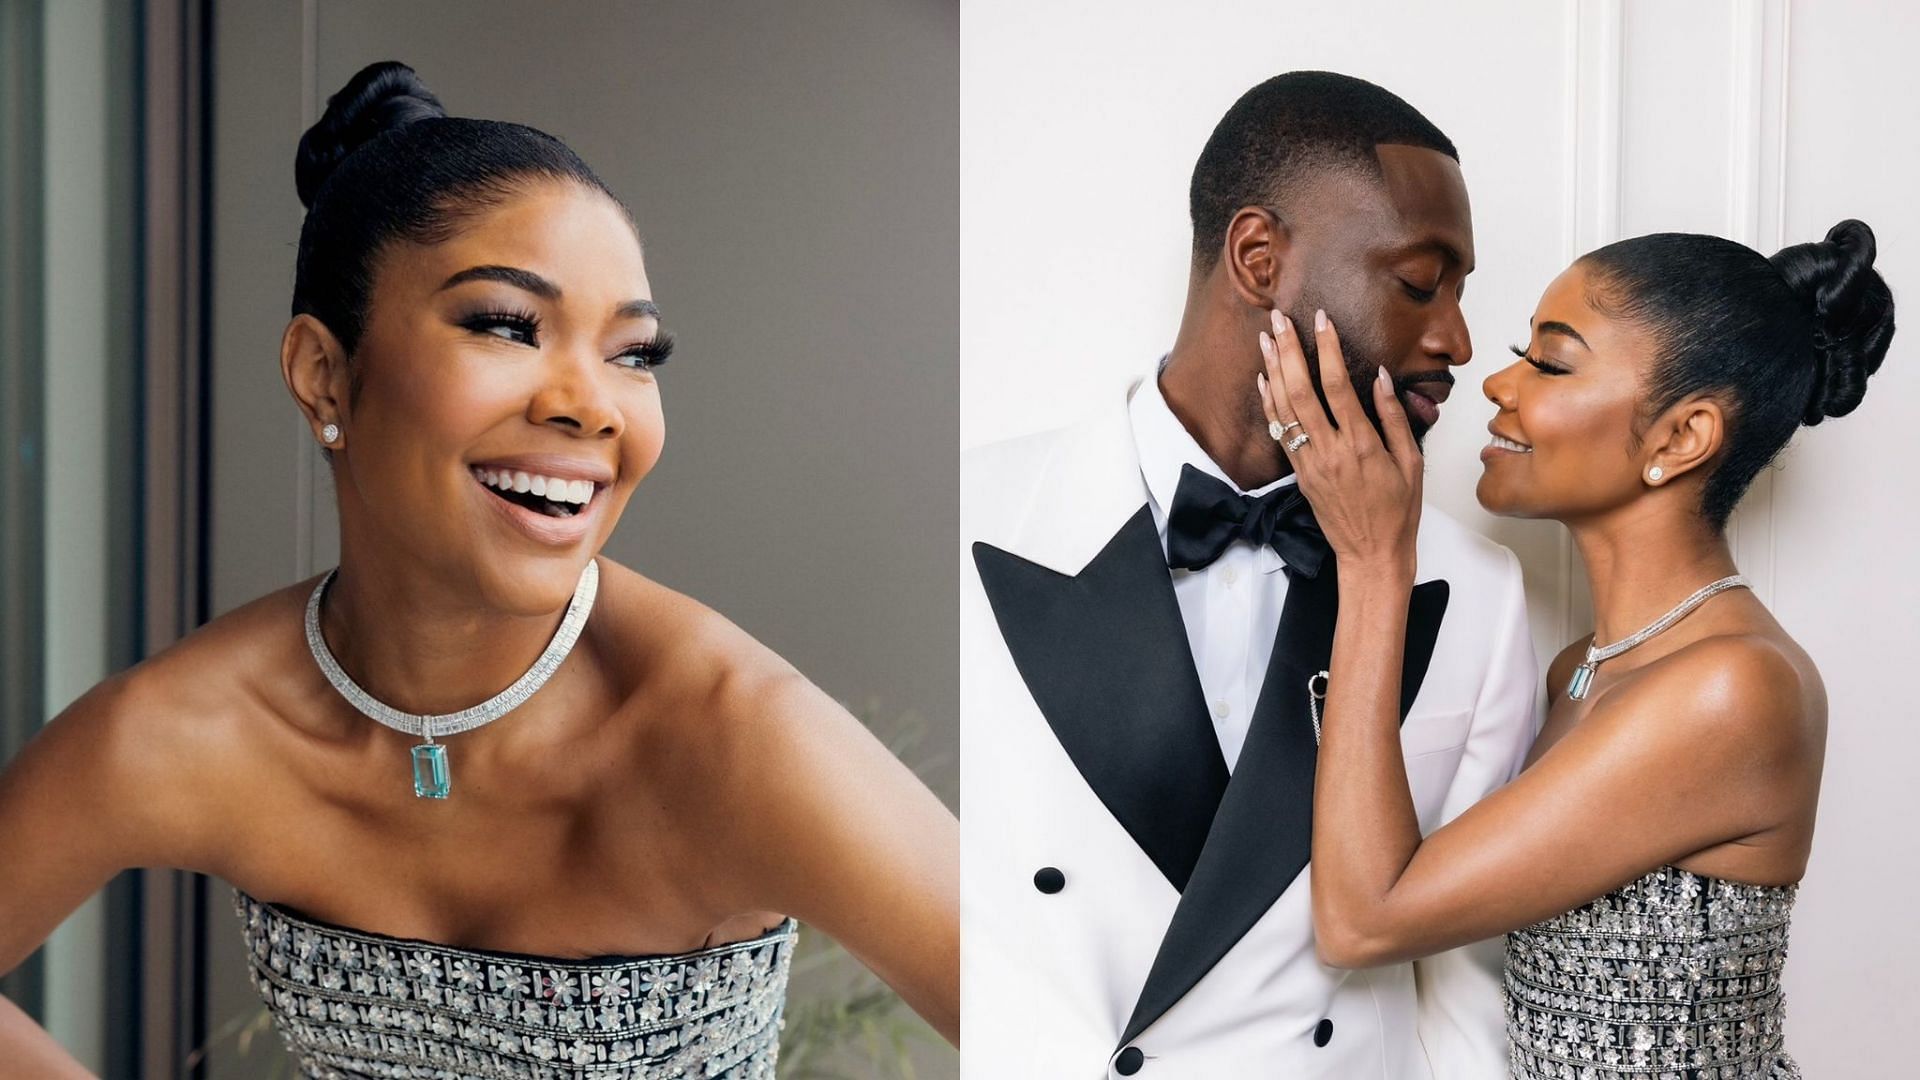 Dwyane Wade and Gabrielle Union show off their stunning outfits for the Oscars